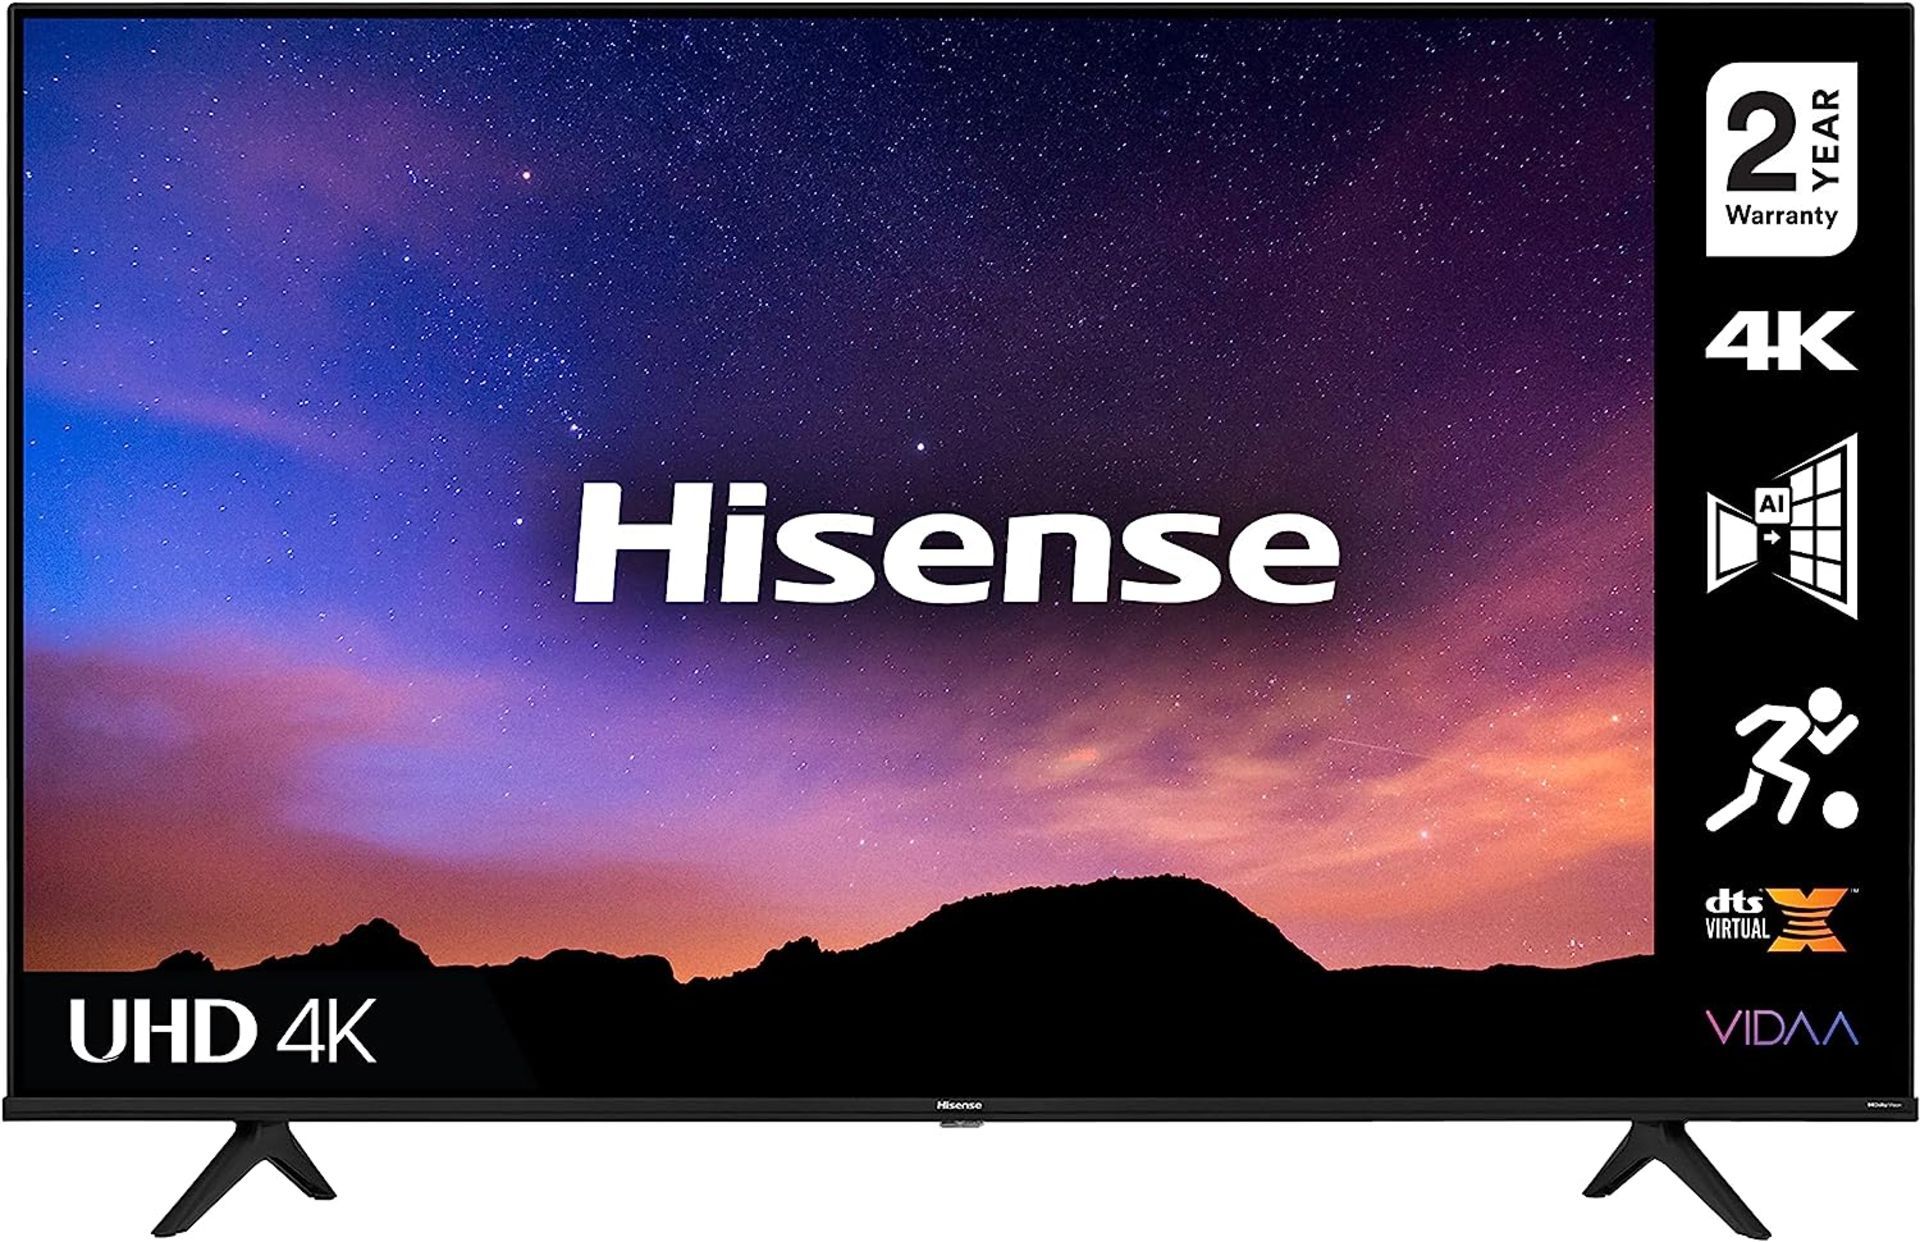 Hisense A6 Series 55 Inch 4K UHD Smart TV, with Dolby Vision HDR. (PW55A6). 4K UHD: 4 times higher